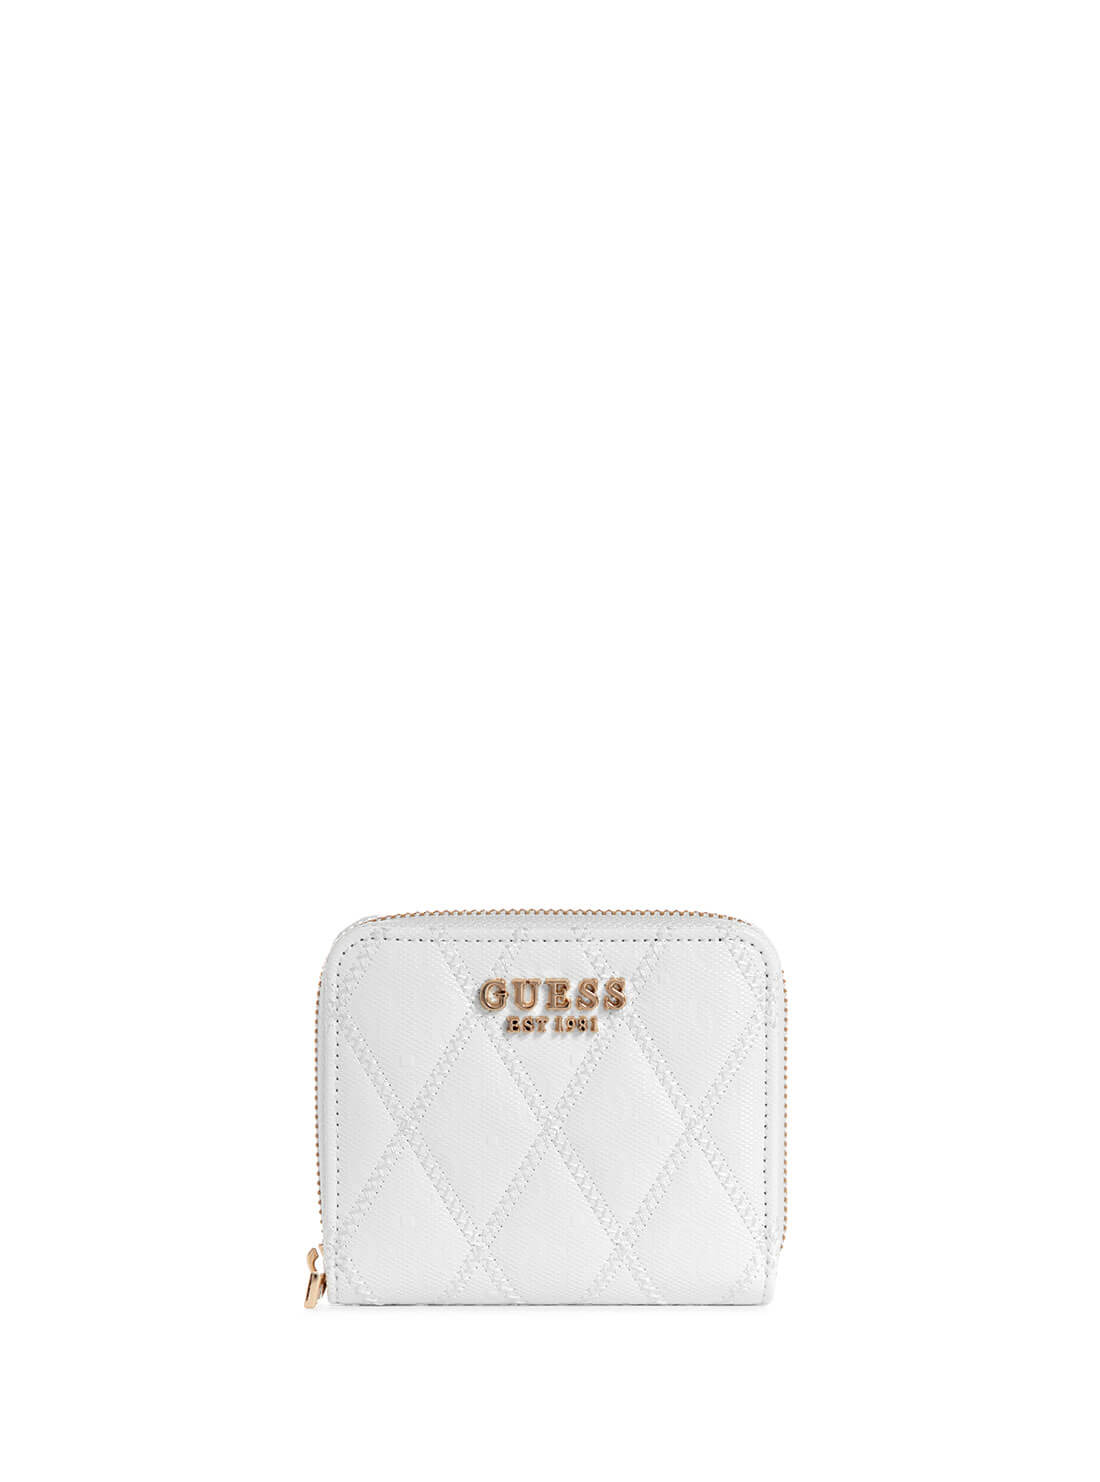 GUESS White Adi Small Wallet front view